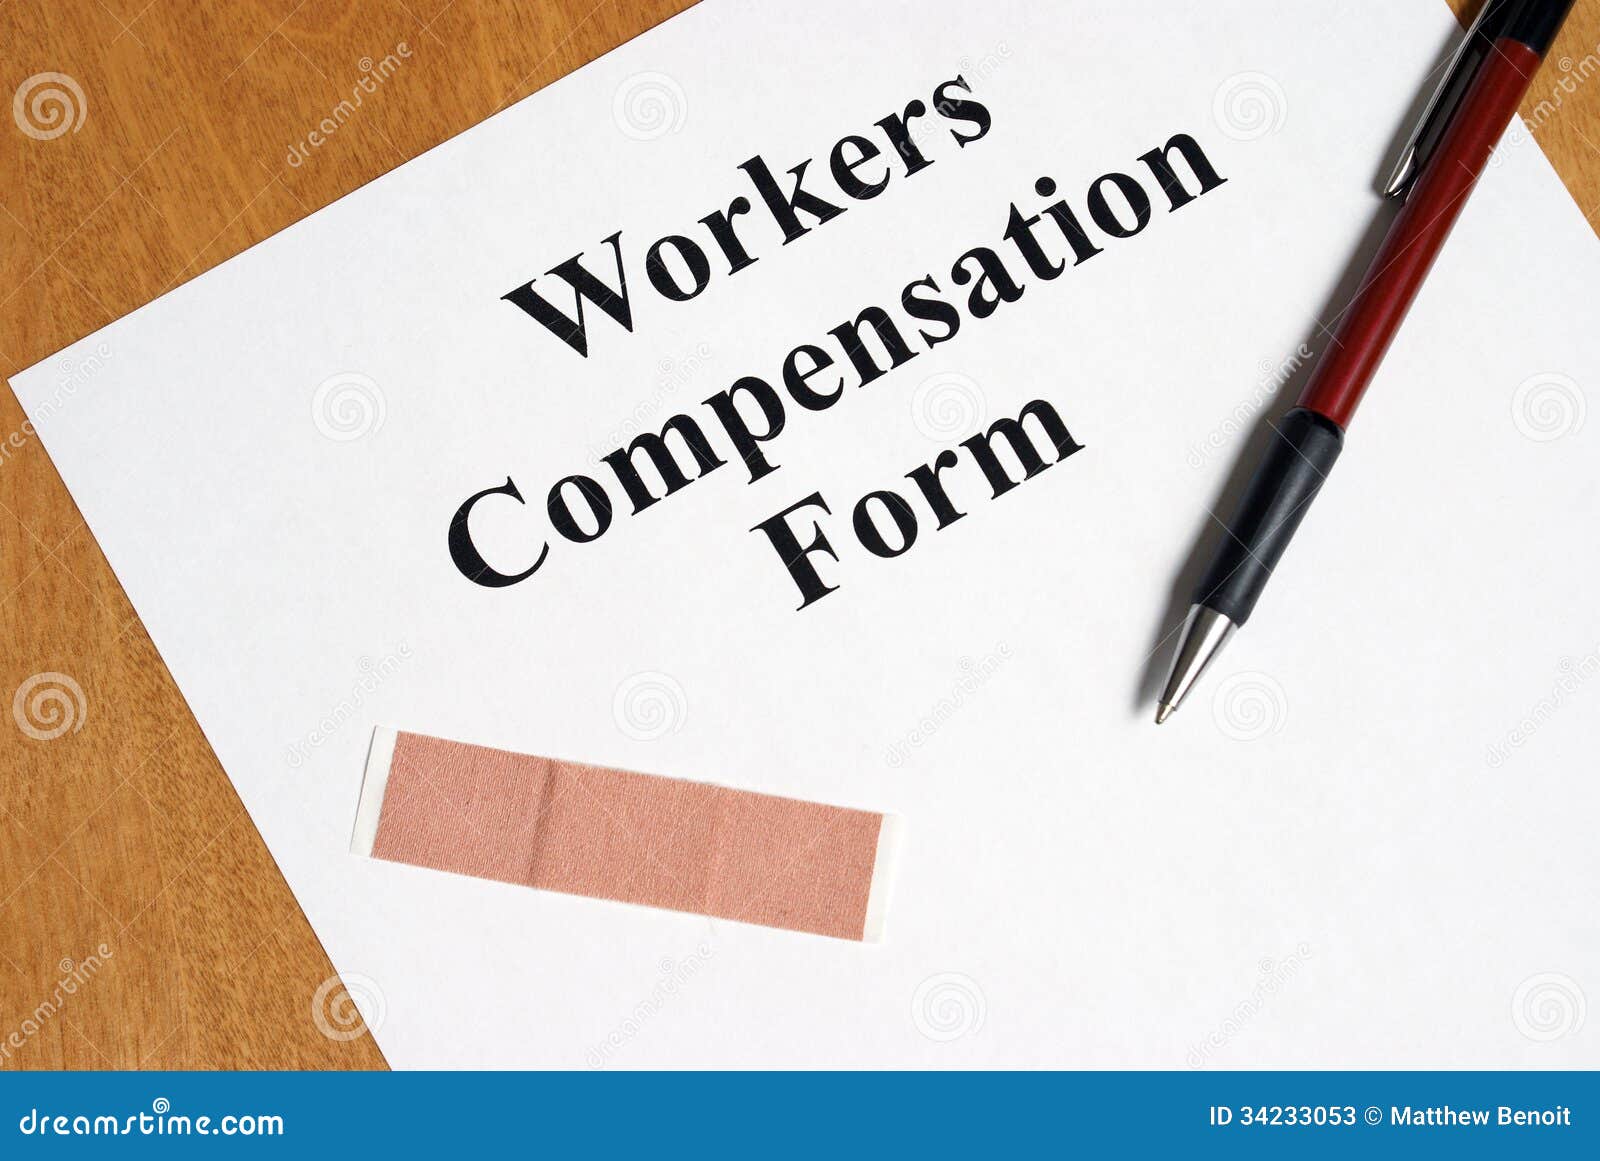 Workers Compensation Stock Photos - Image: 34233053